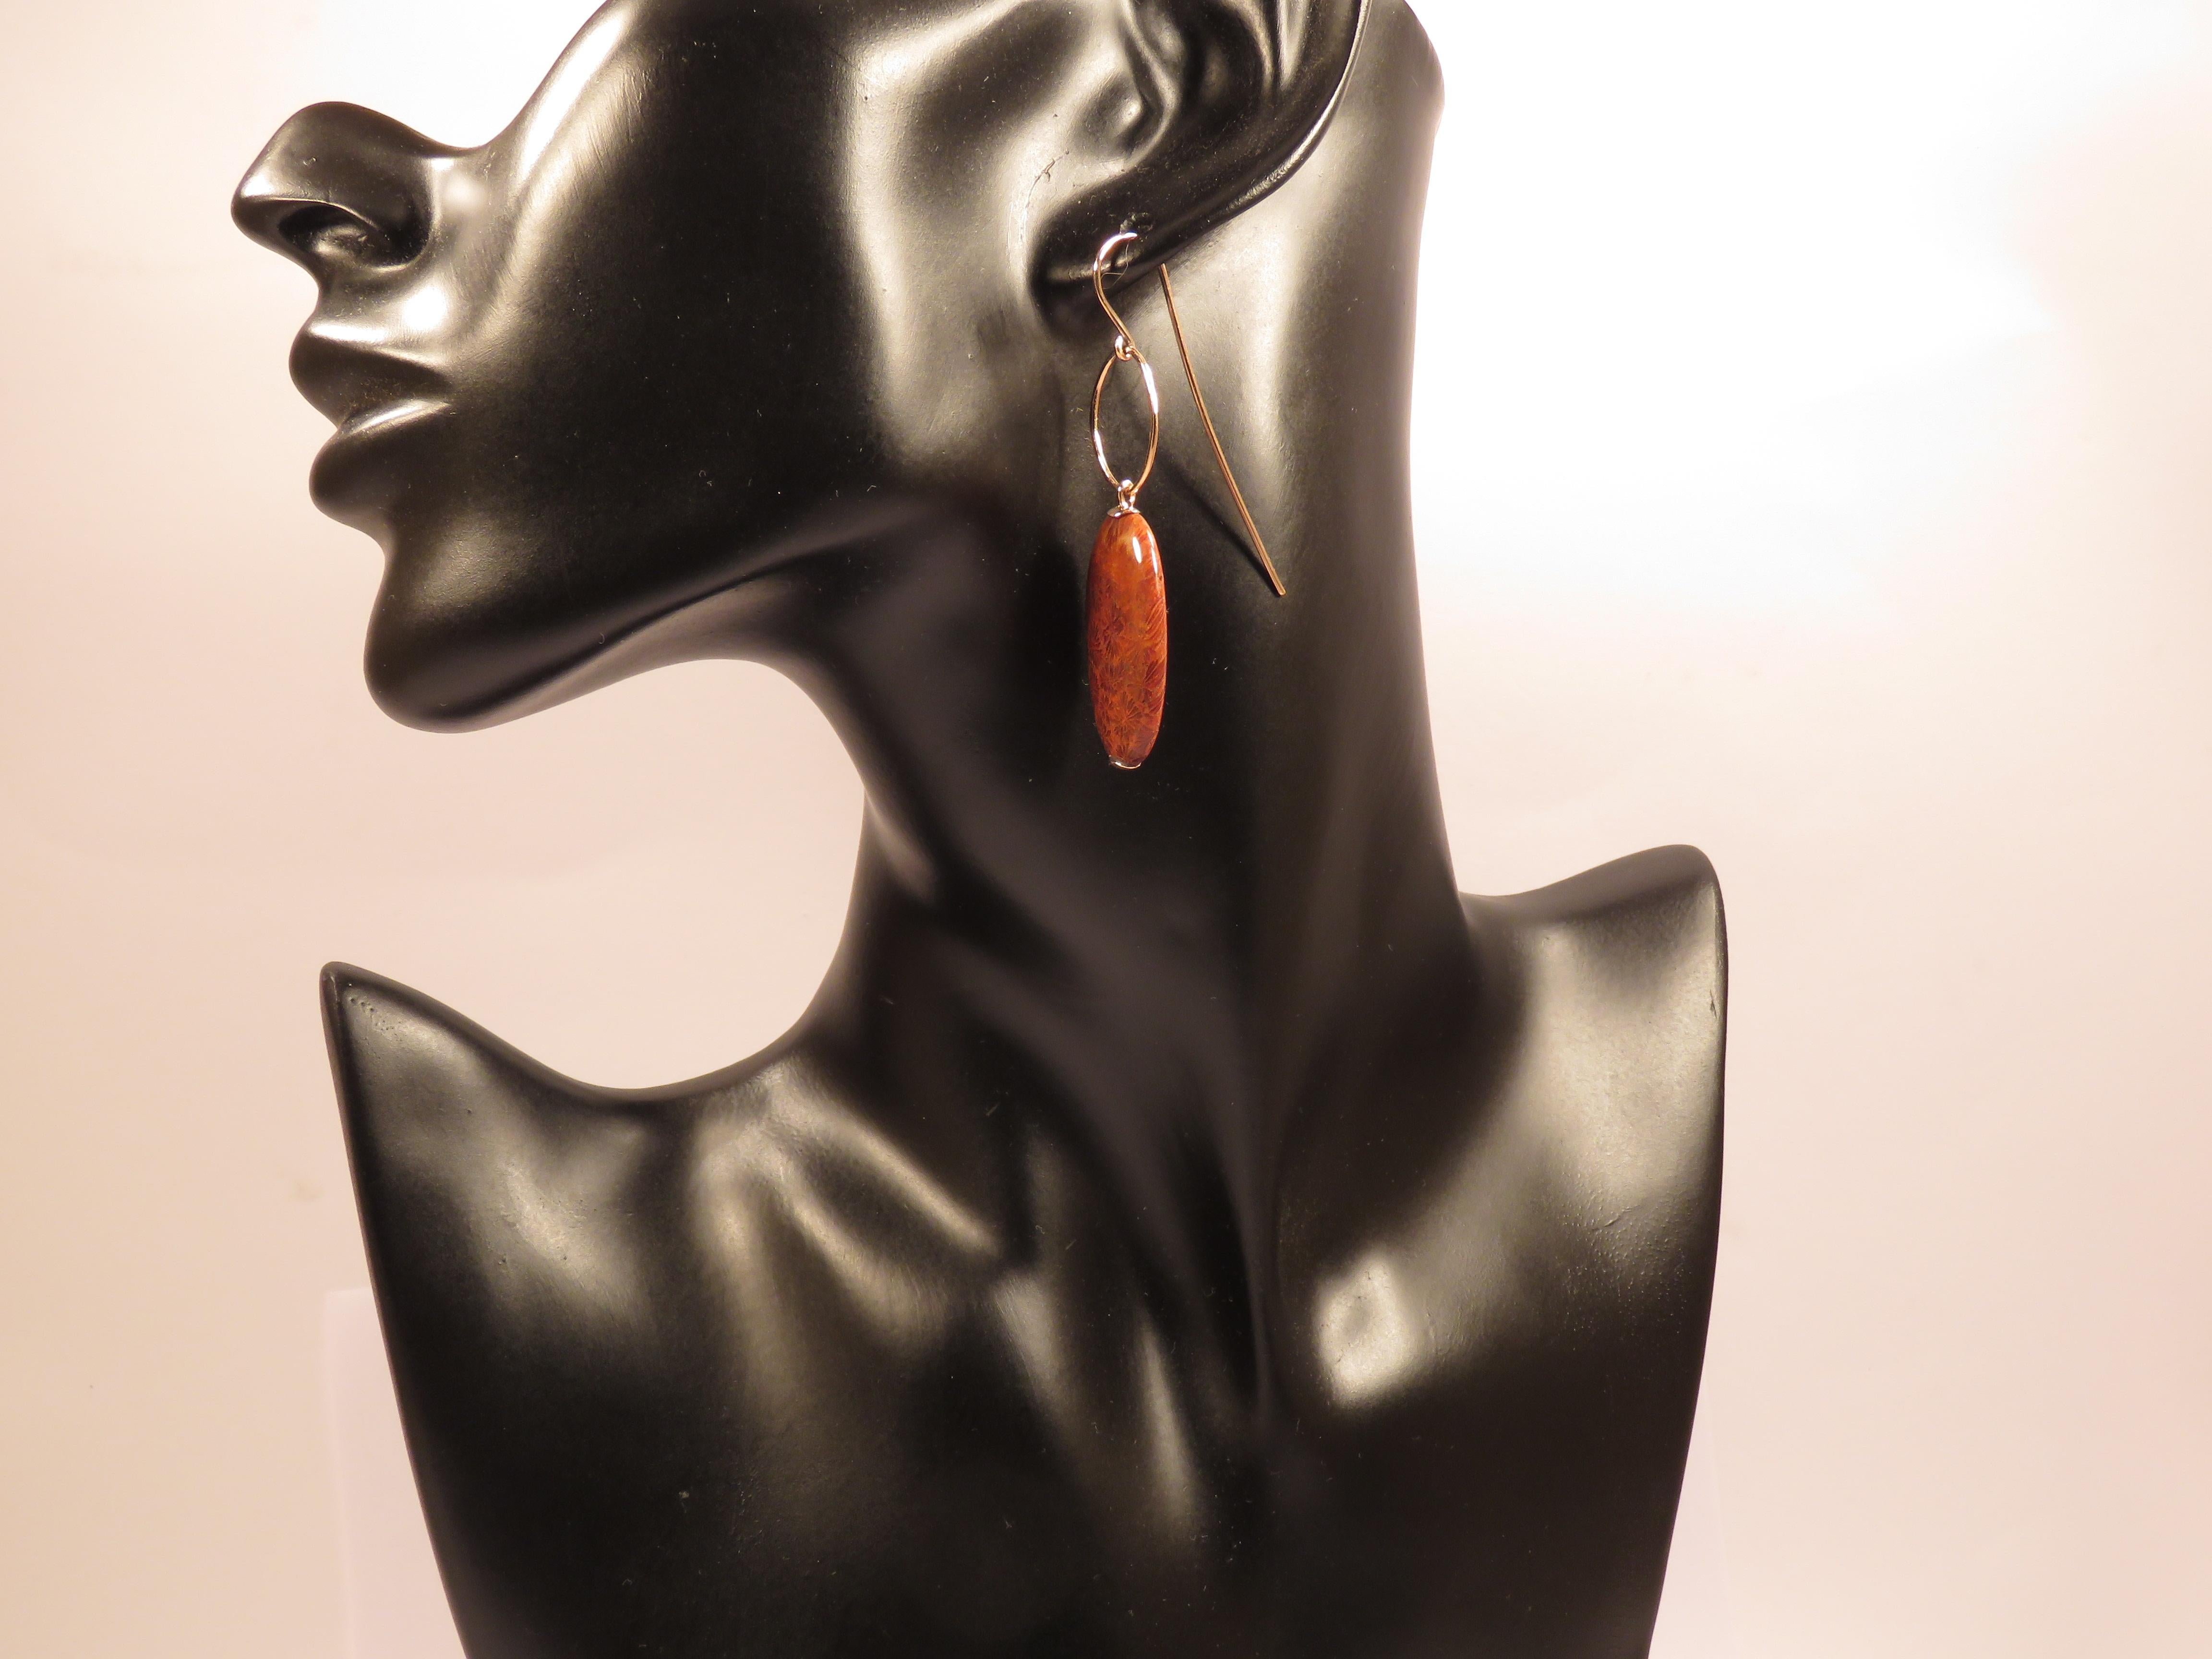 Beautiful earrings in rose 9k gold with natural dendritic agate.
Total length of each earring is 60 millimeters / 2.36 inches. They are handcrafted in Italy by Botta Gioielli. This item is stamped with the Italian Gold Mark 375 - 716MI.
Ready for